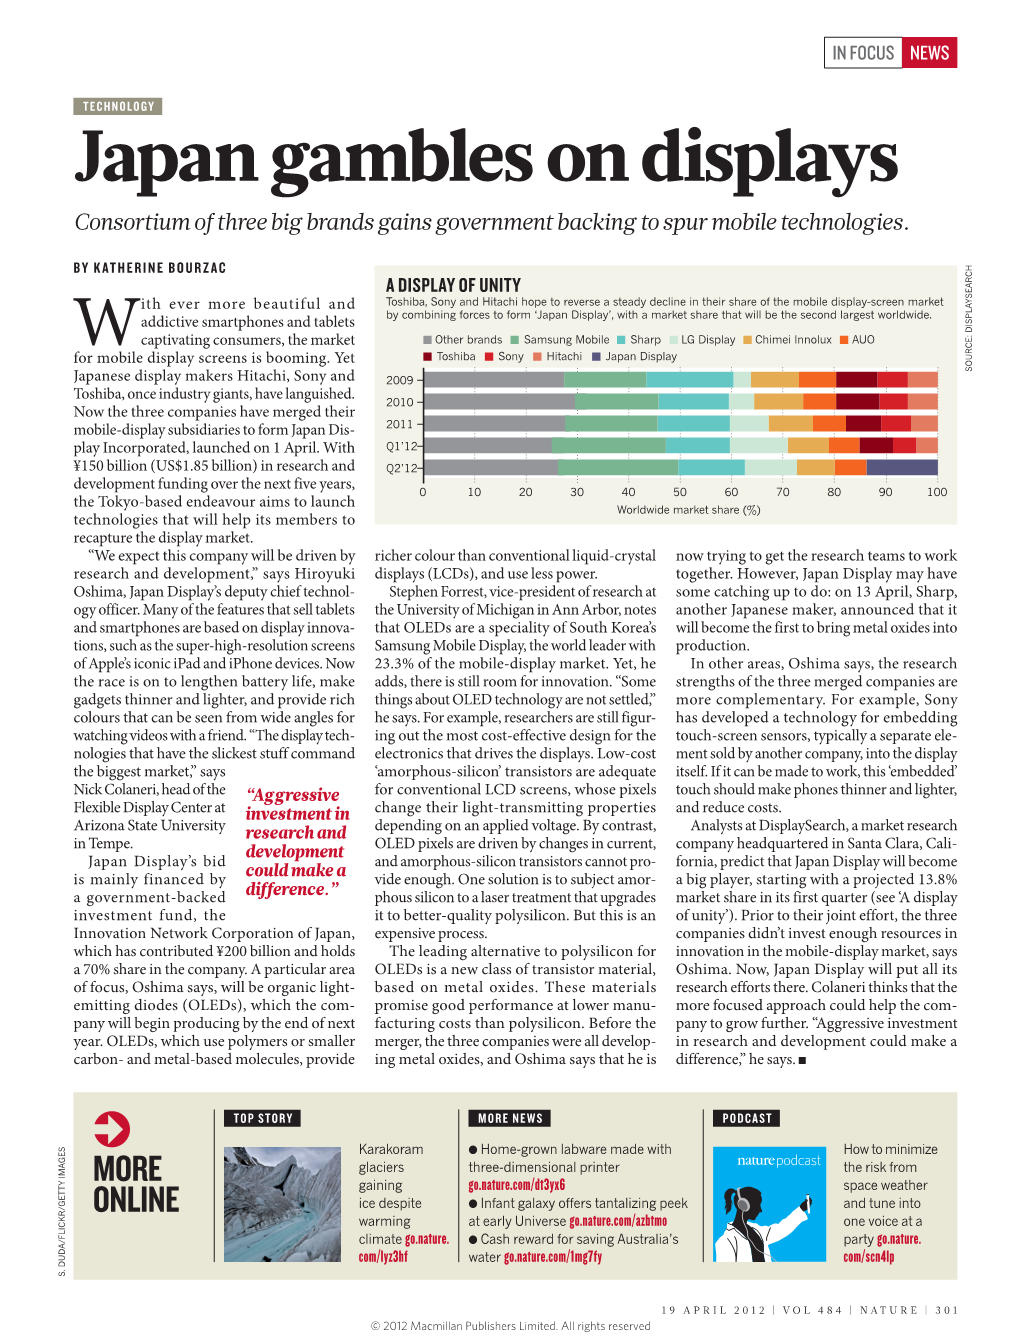 Japan Gambles on Displays Consortium of Three Big Brands Gains Government Backing to Spur Mobile Technologies